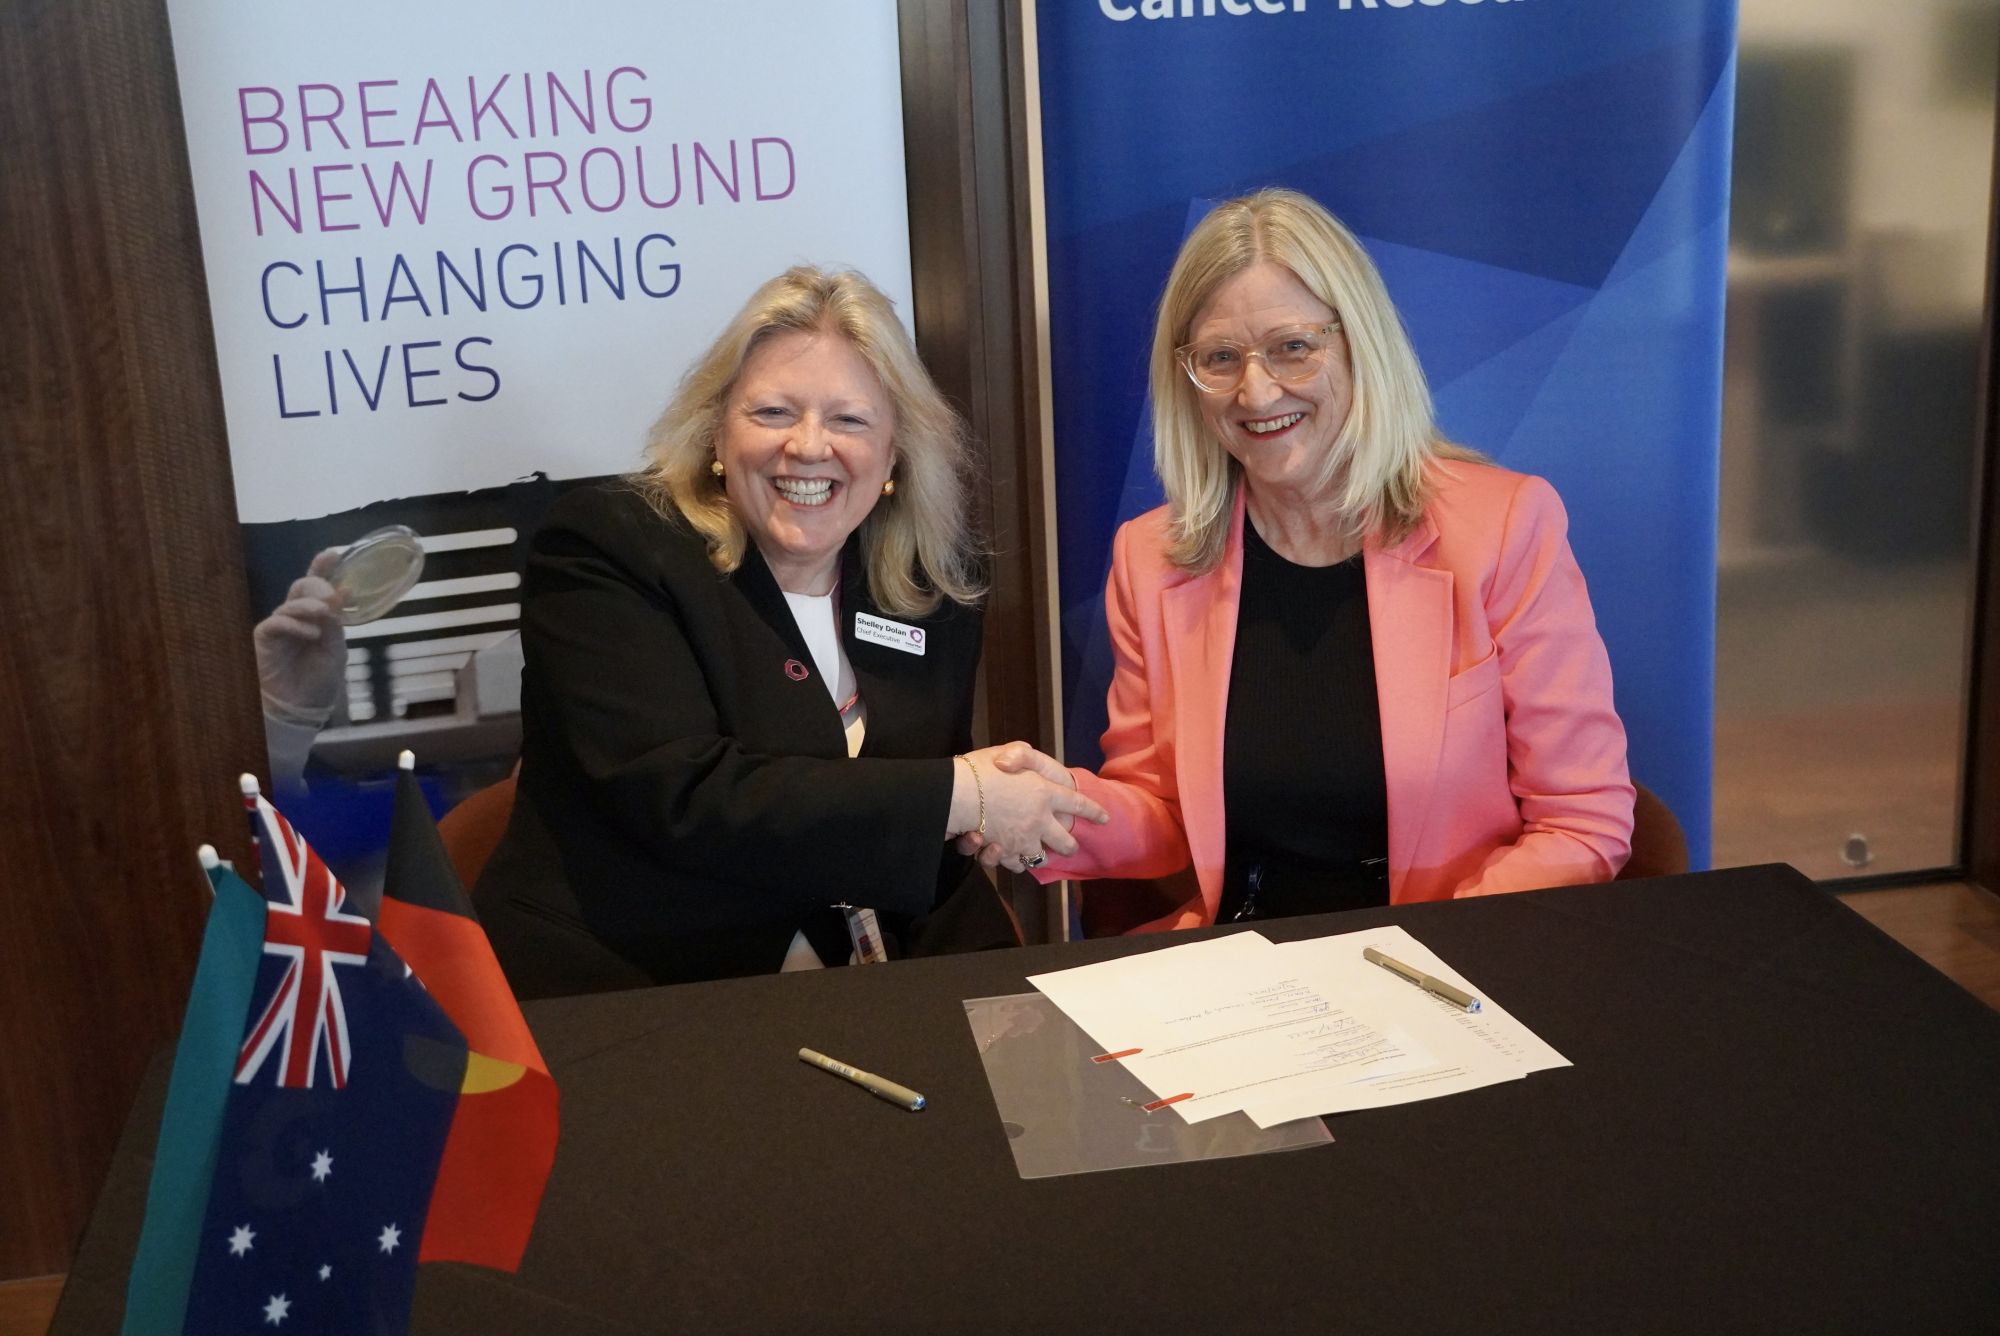 Professor Shelley Dolan, Chief Executive of the Peter MacCallum Cancer Centre, shakes hands with Professor Jane Gunn AO, Dean of the Faculty of Medicine, Dentistry and Health Sciences, at the signing of the MoU. Shelley and Jane are seated at small table, on which the MoU documents are placed. 